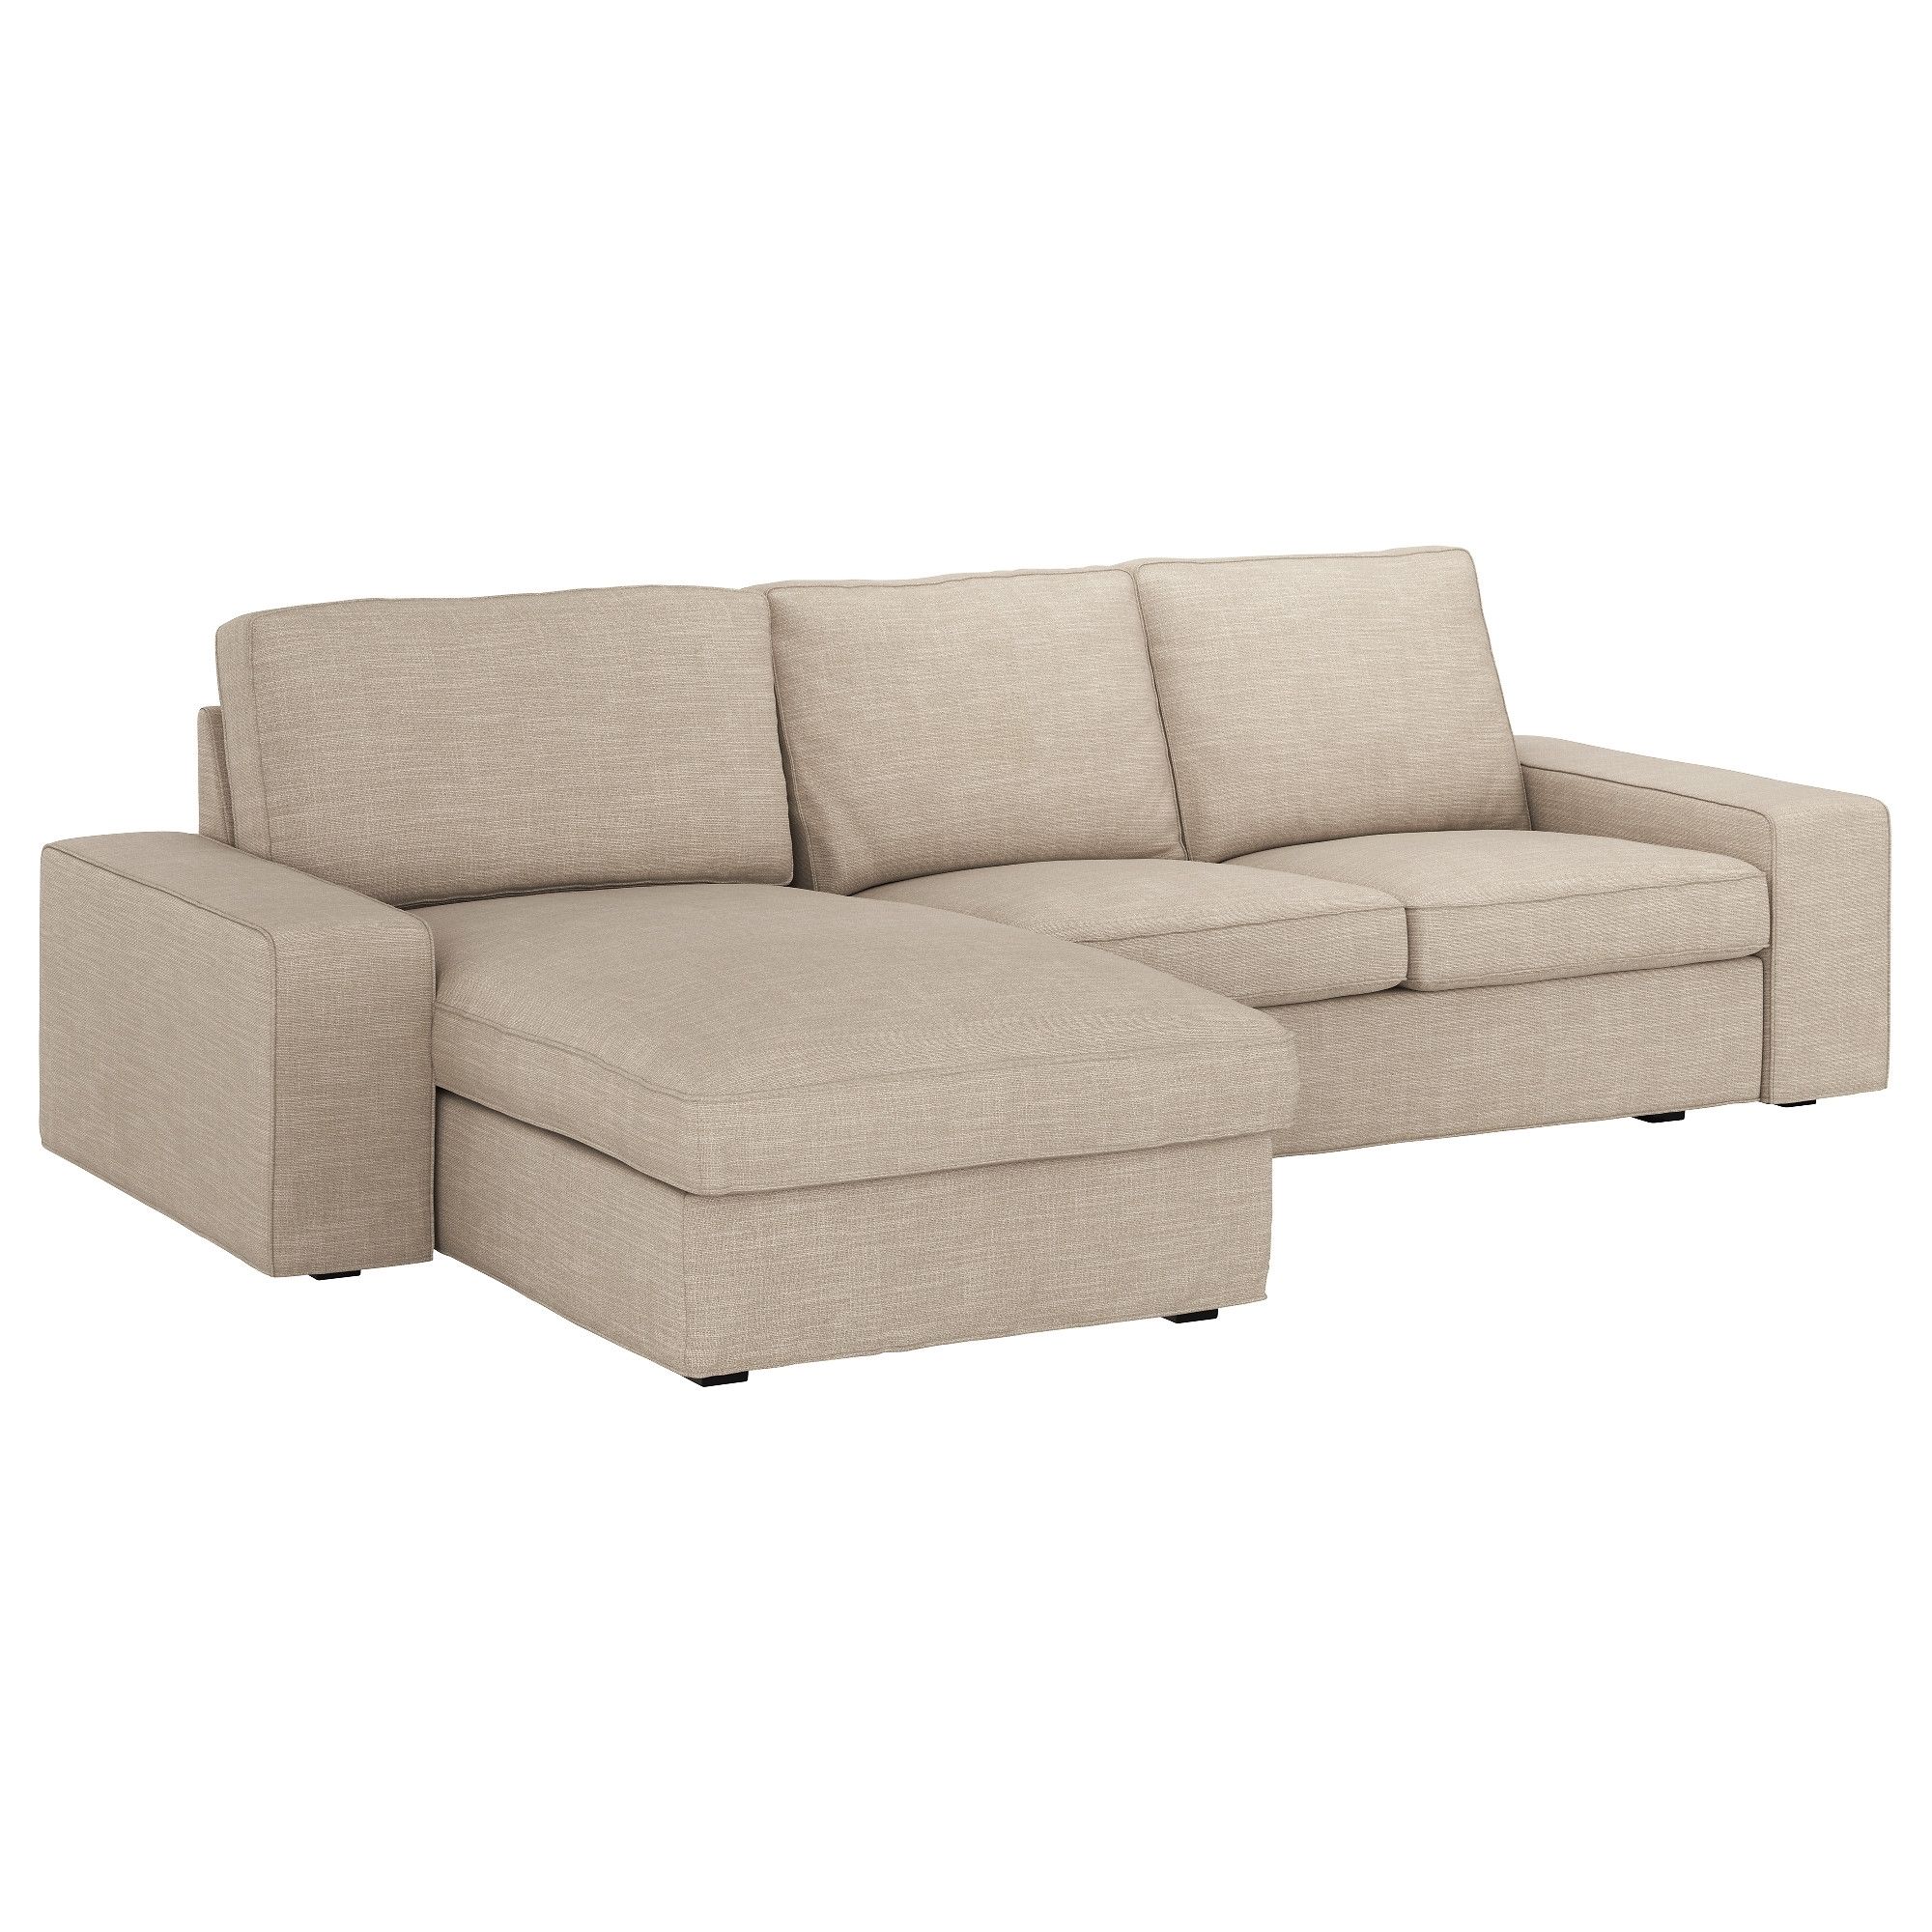 Popular Kivik Sofa – With Chaise/hillared Anthracite – Ikea For Ikea Chaise Couches (View 3 of 15)